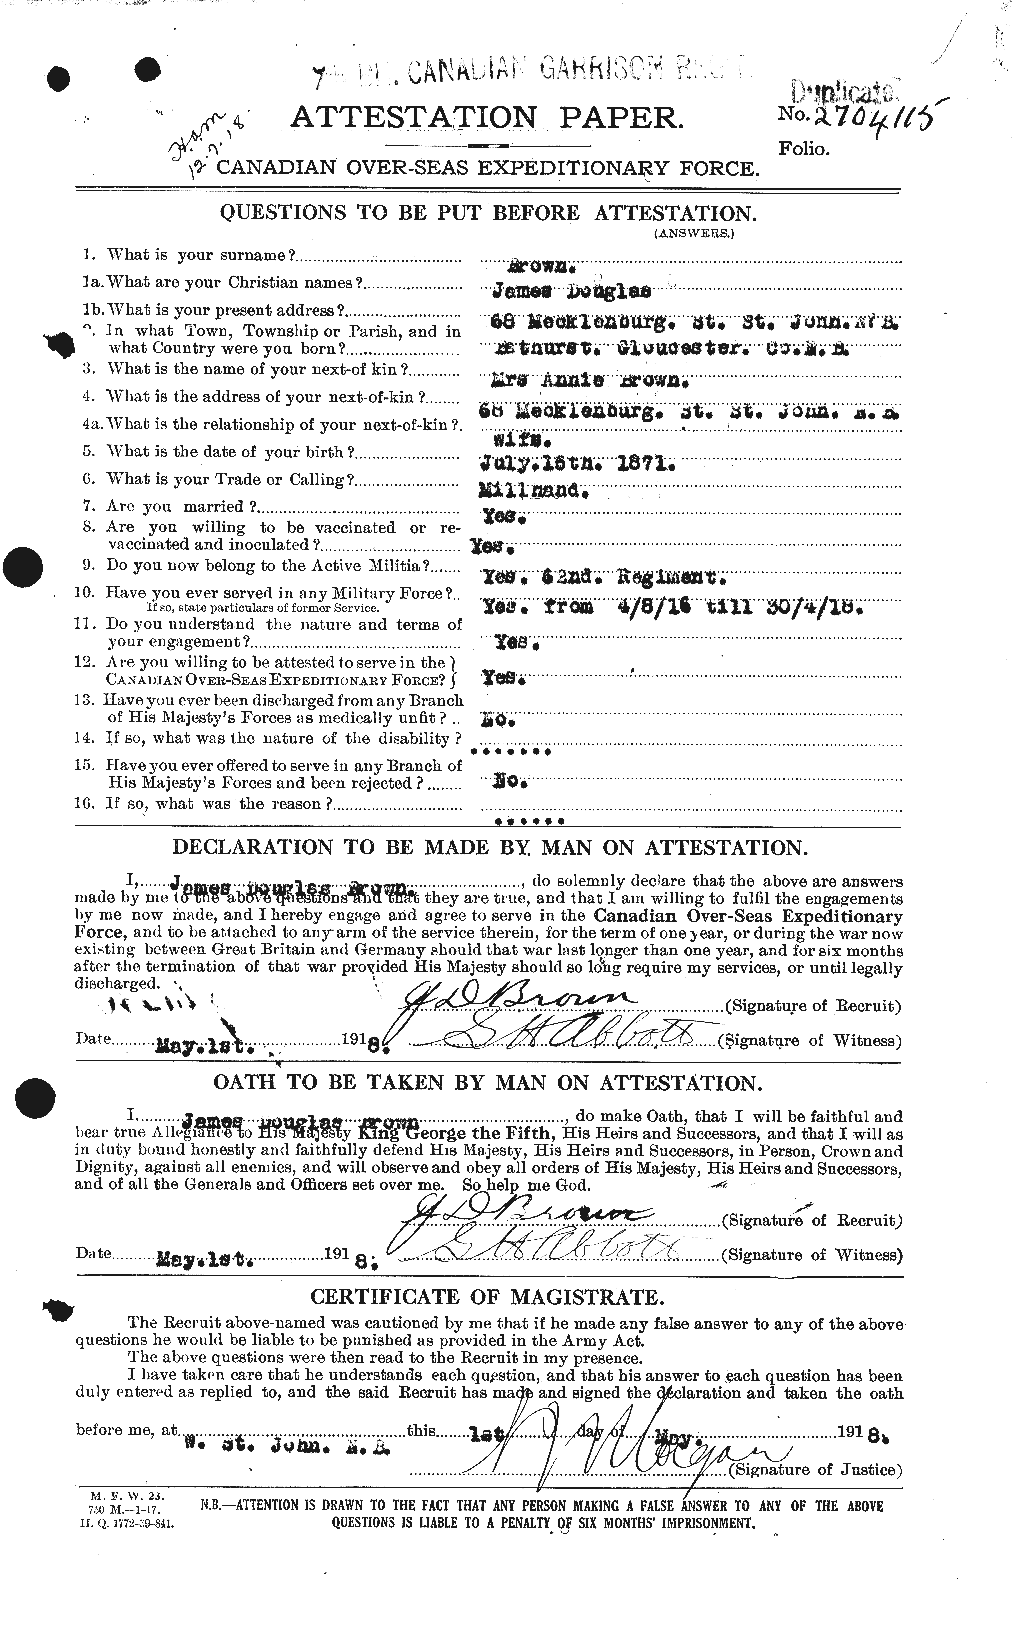 Personnel Records of the First World War - CEF 265812a